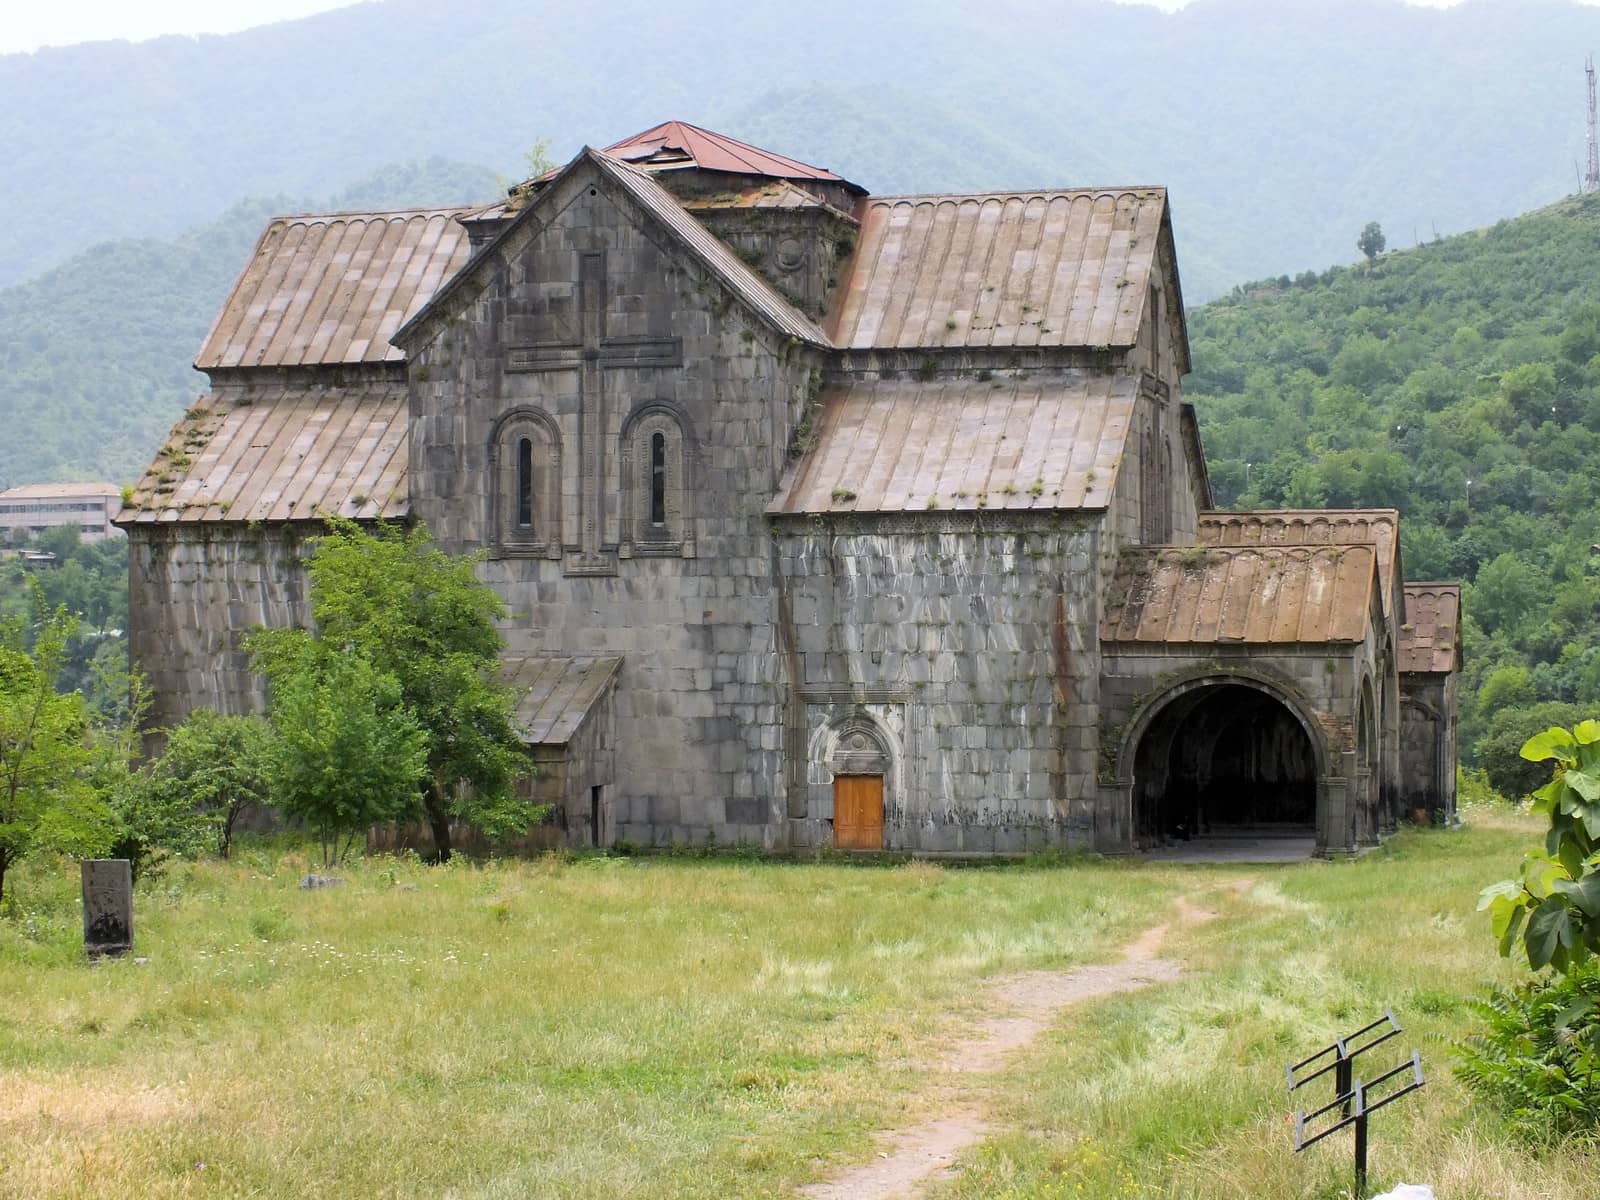 The exact date of the building of the Surp Astvatsatsin (Holy Mother of God) church at Akhtala is unknown, but it is generally regarded as a 11th - 13th century complex